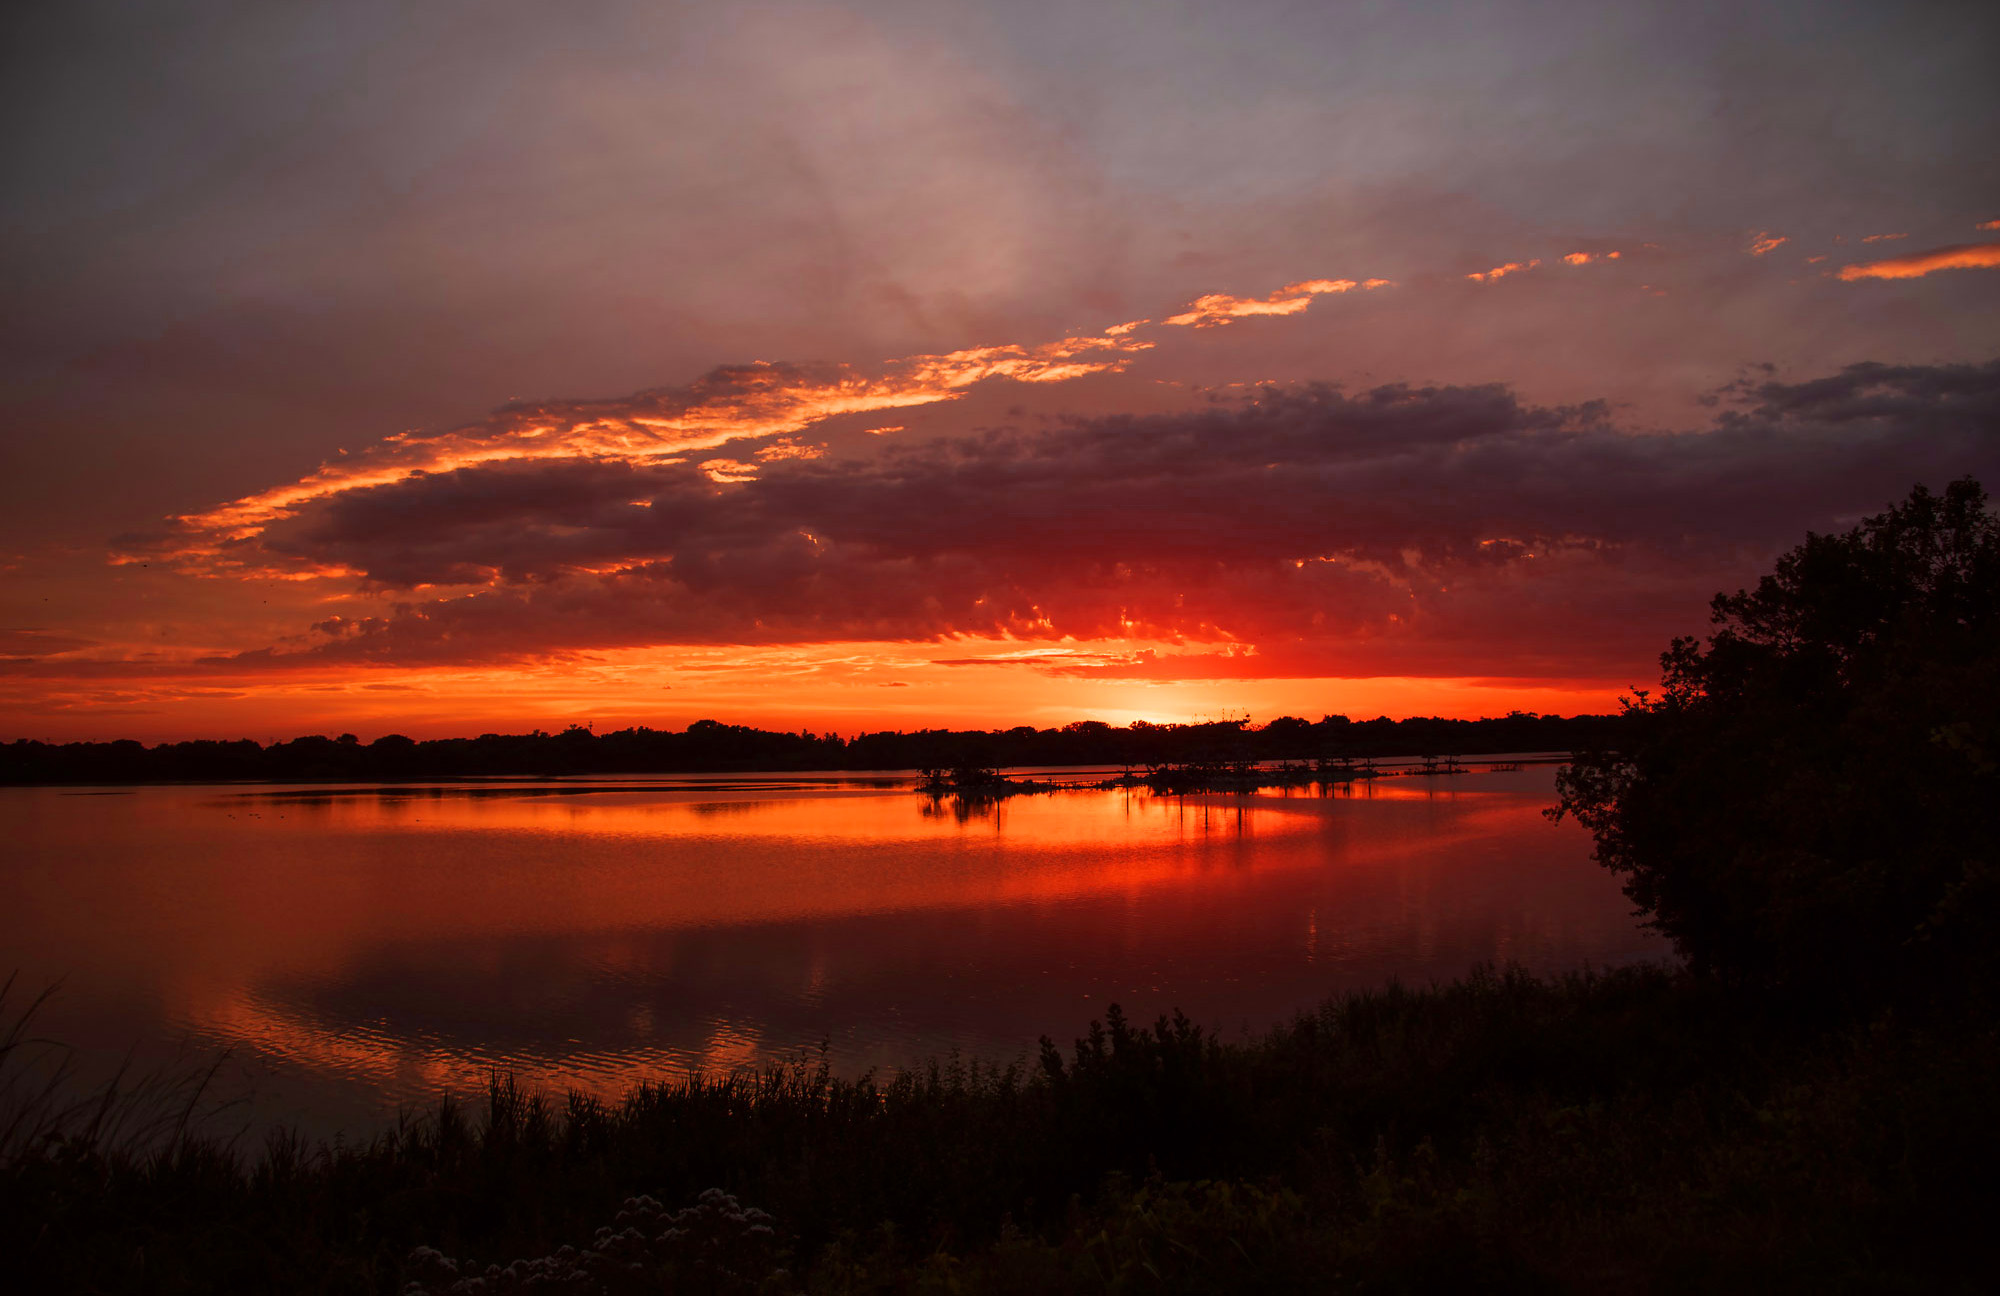 The science behind those pictureperfect sunsets Forest Preserve